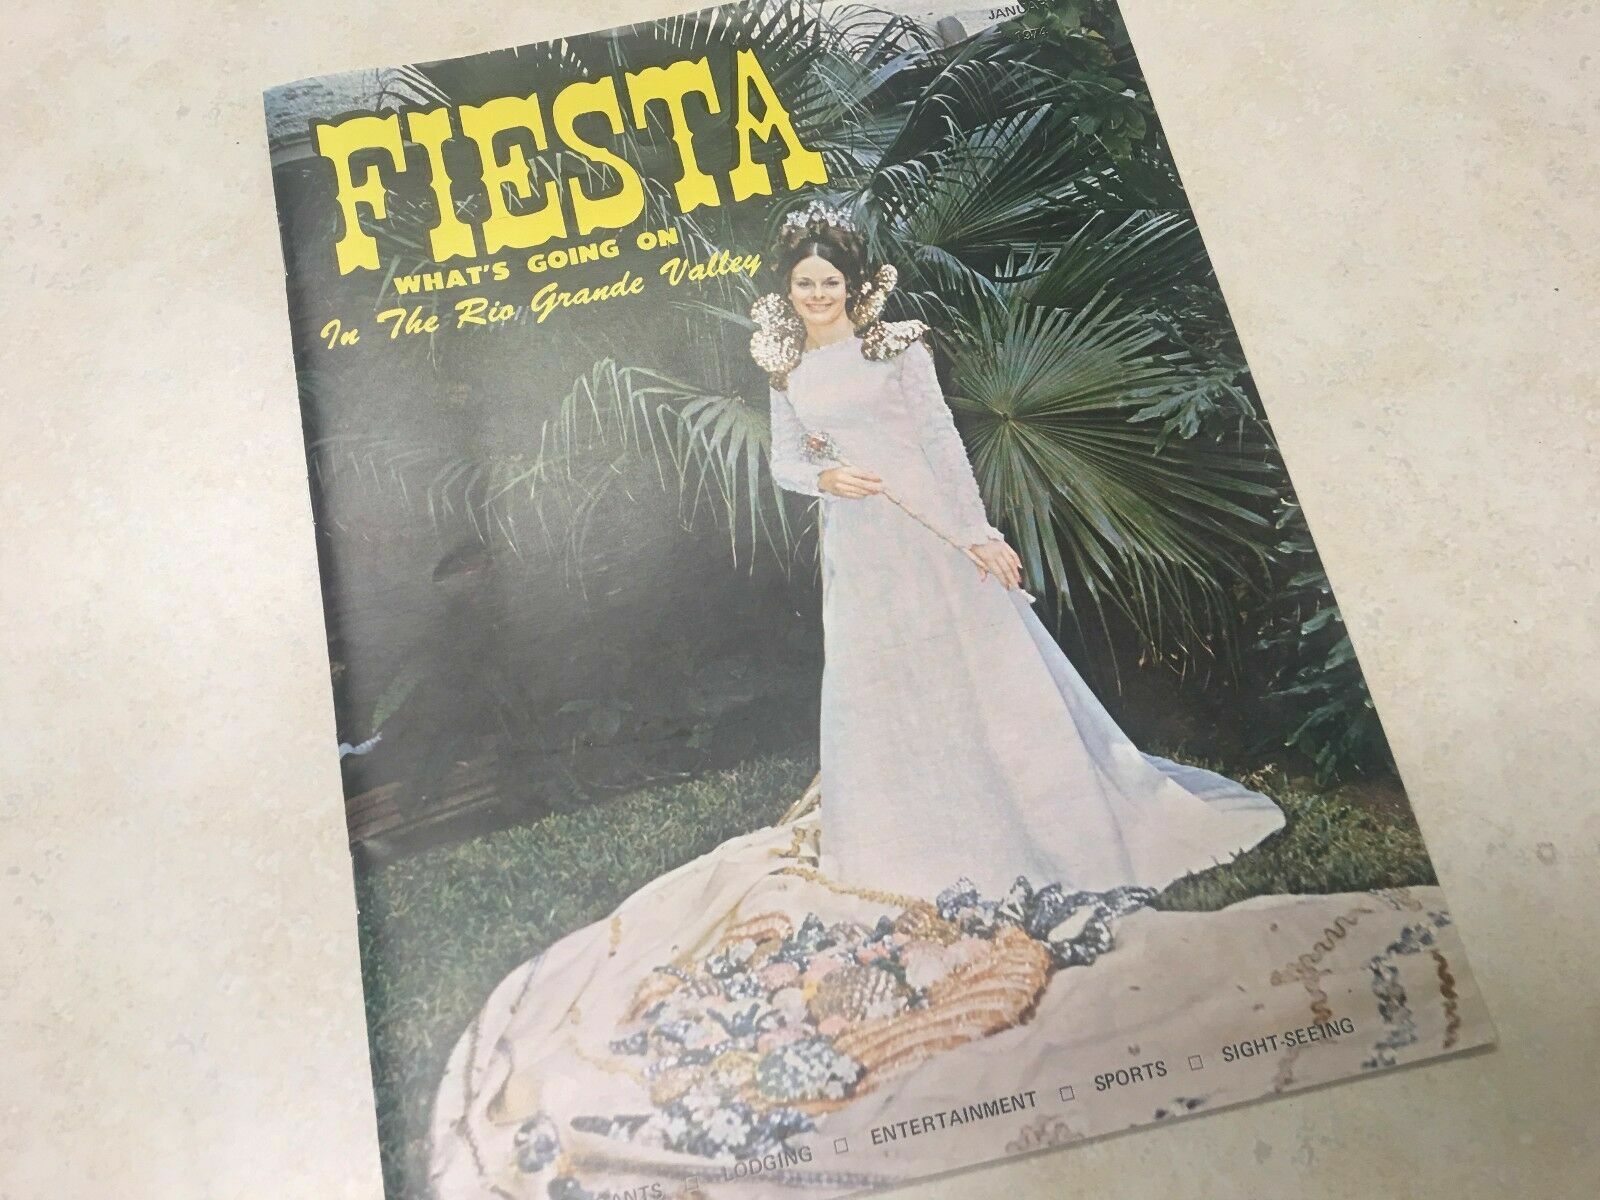 1974 Fiesta Magazine - Whats going on in the Rio Grande Valley Texas